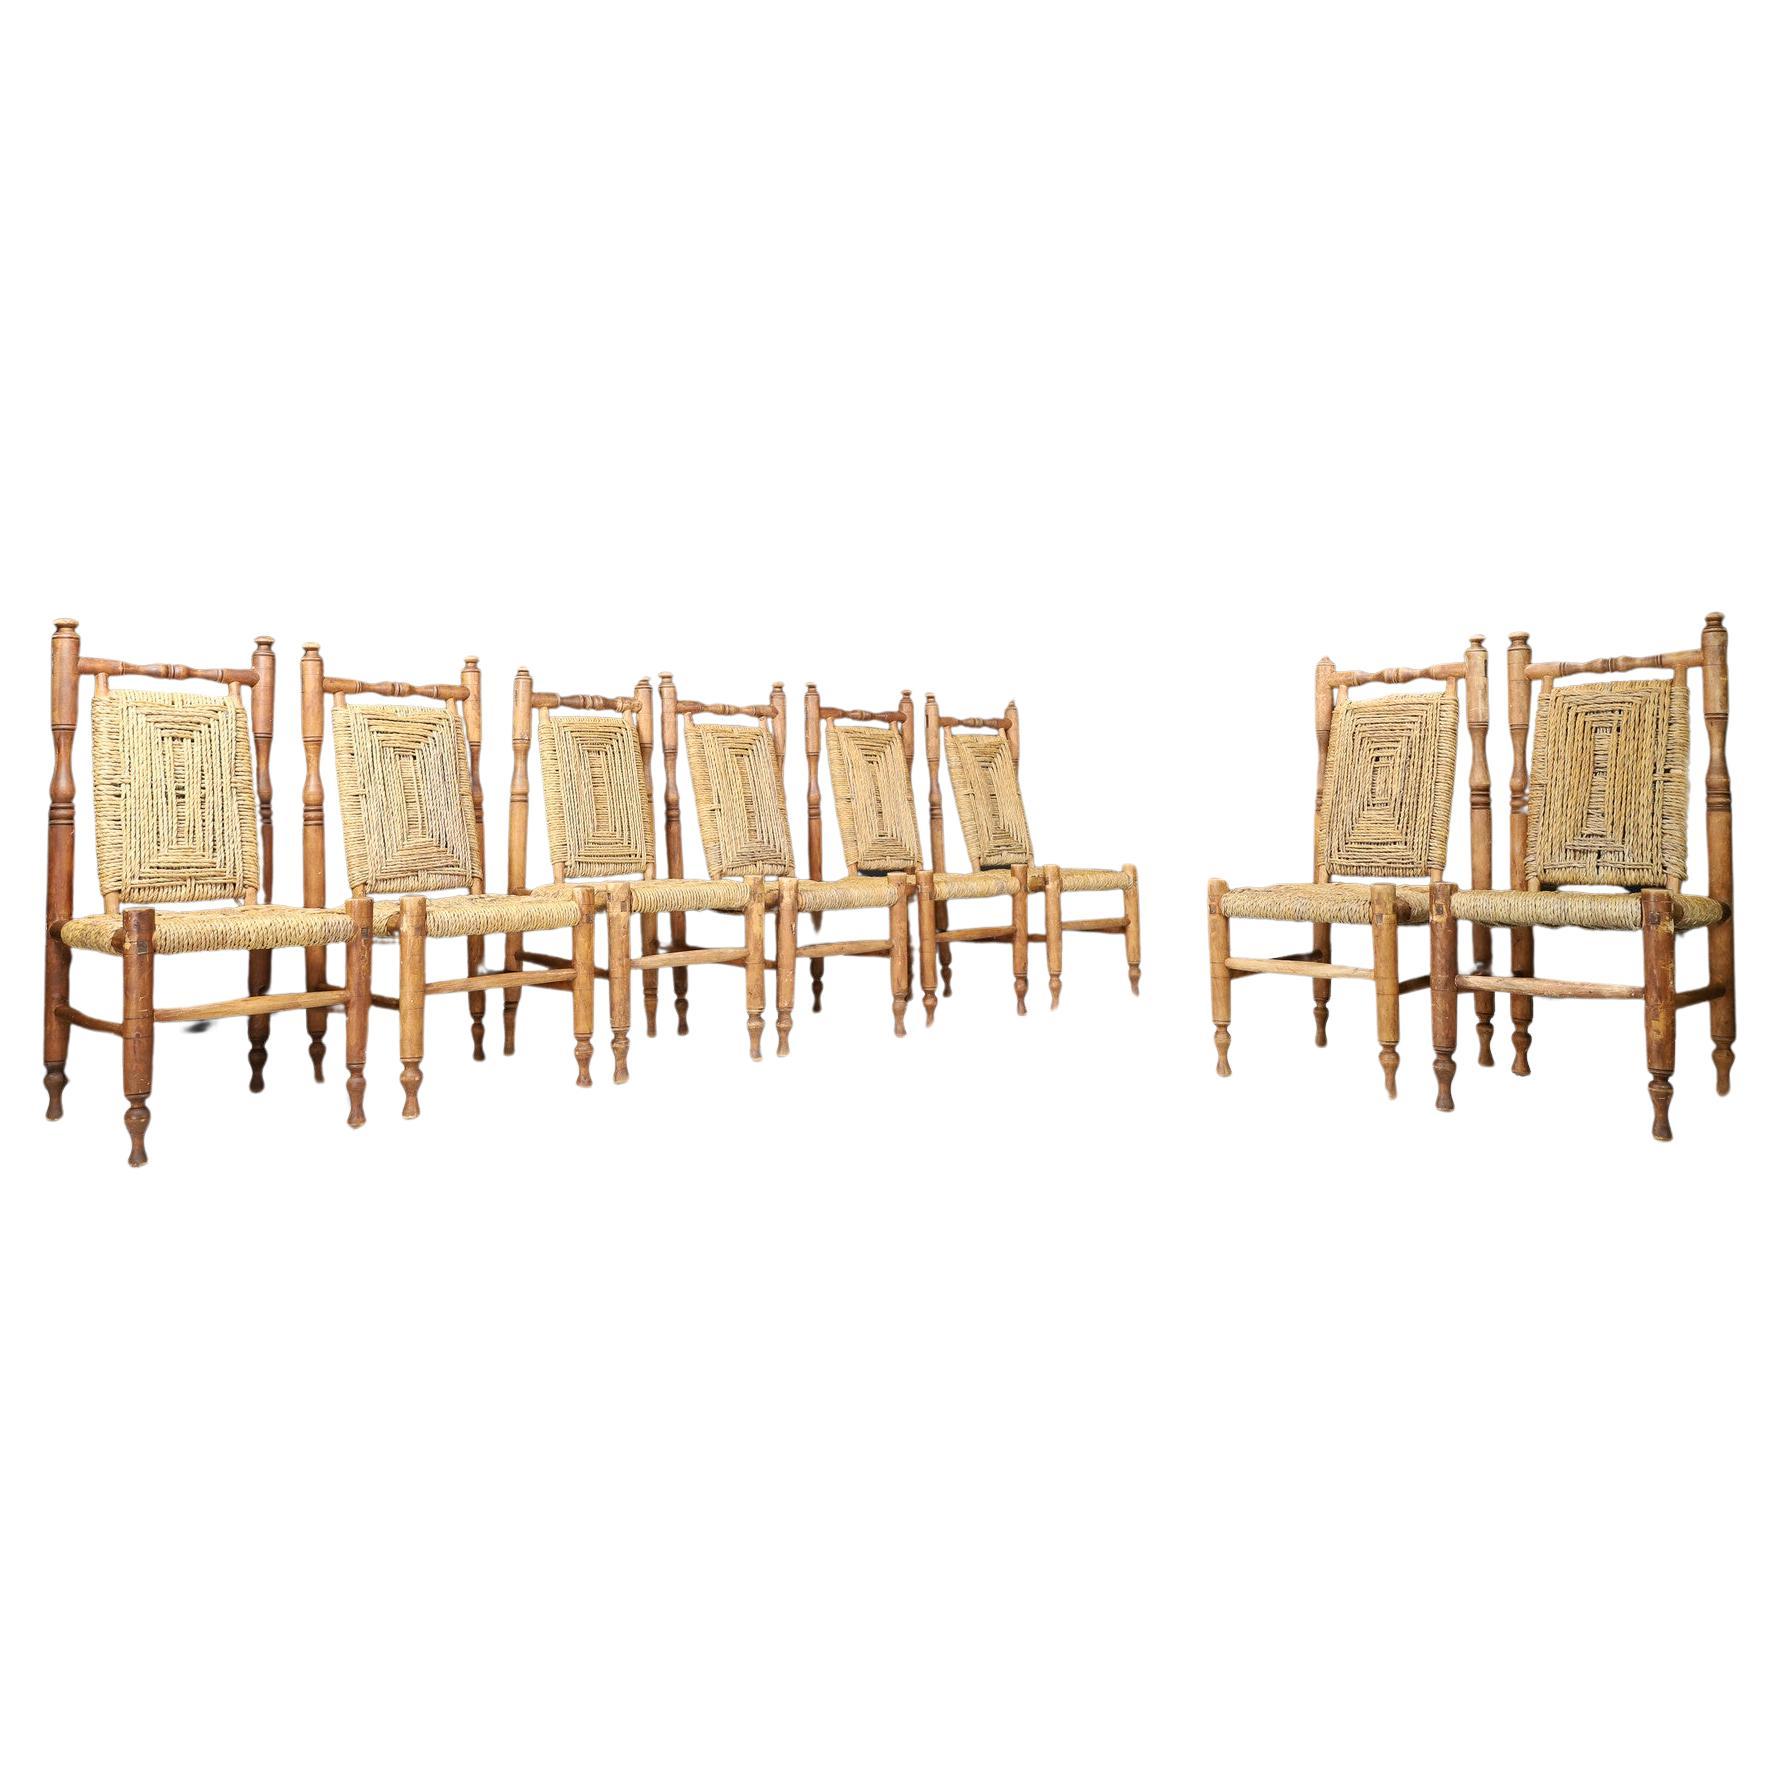 Adrien Audoux and Frida Minet, Set of 8 Mid Century Dining Chairs, circa 1950s For Sale 1